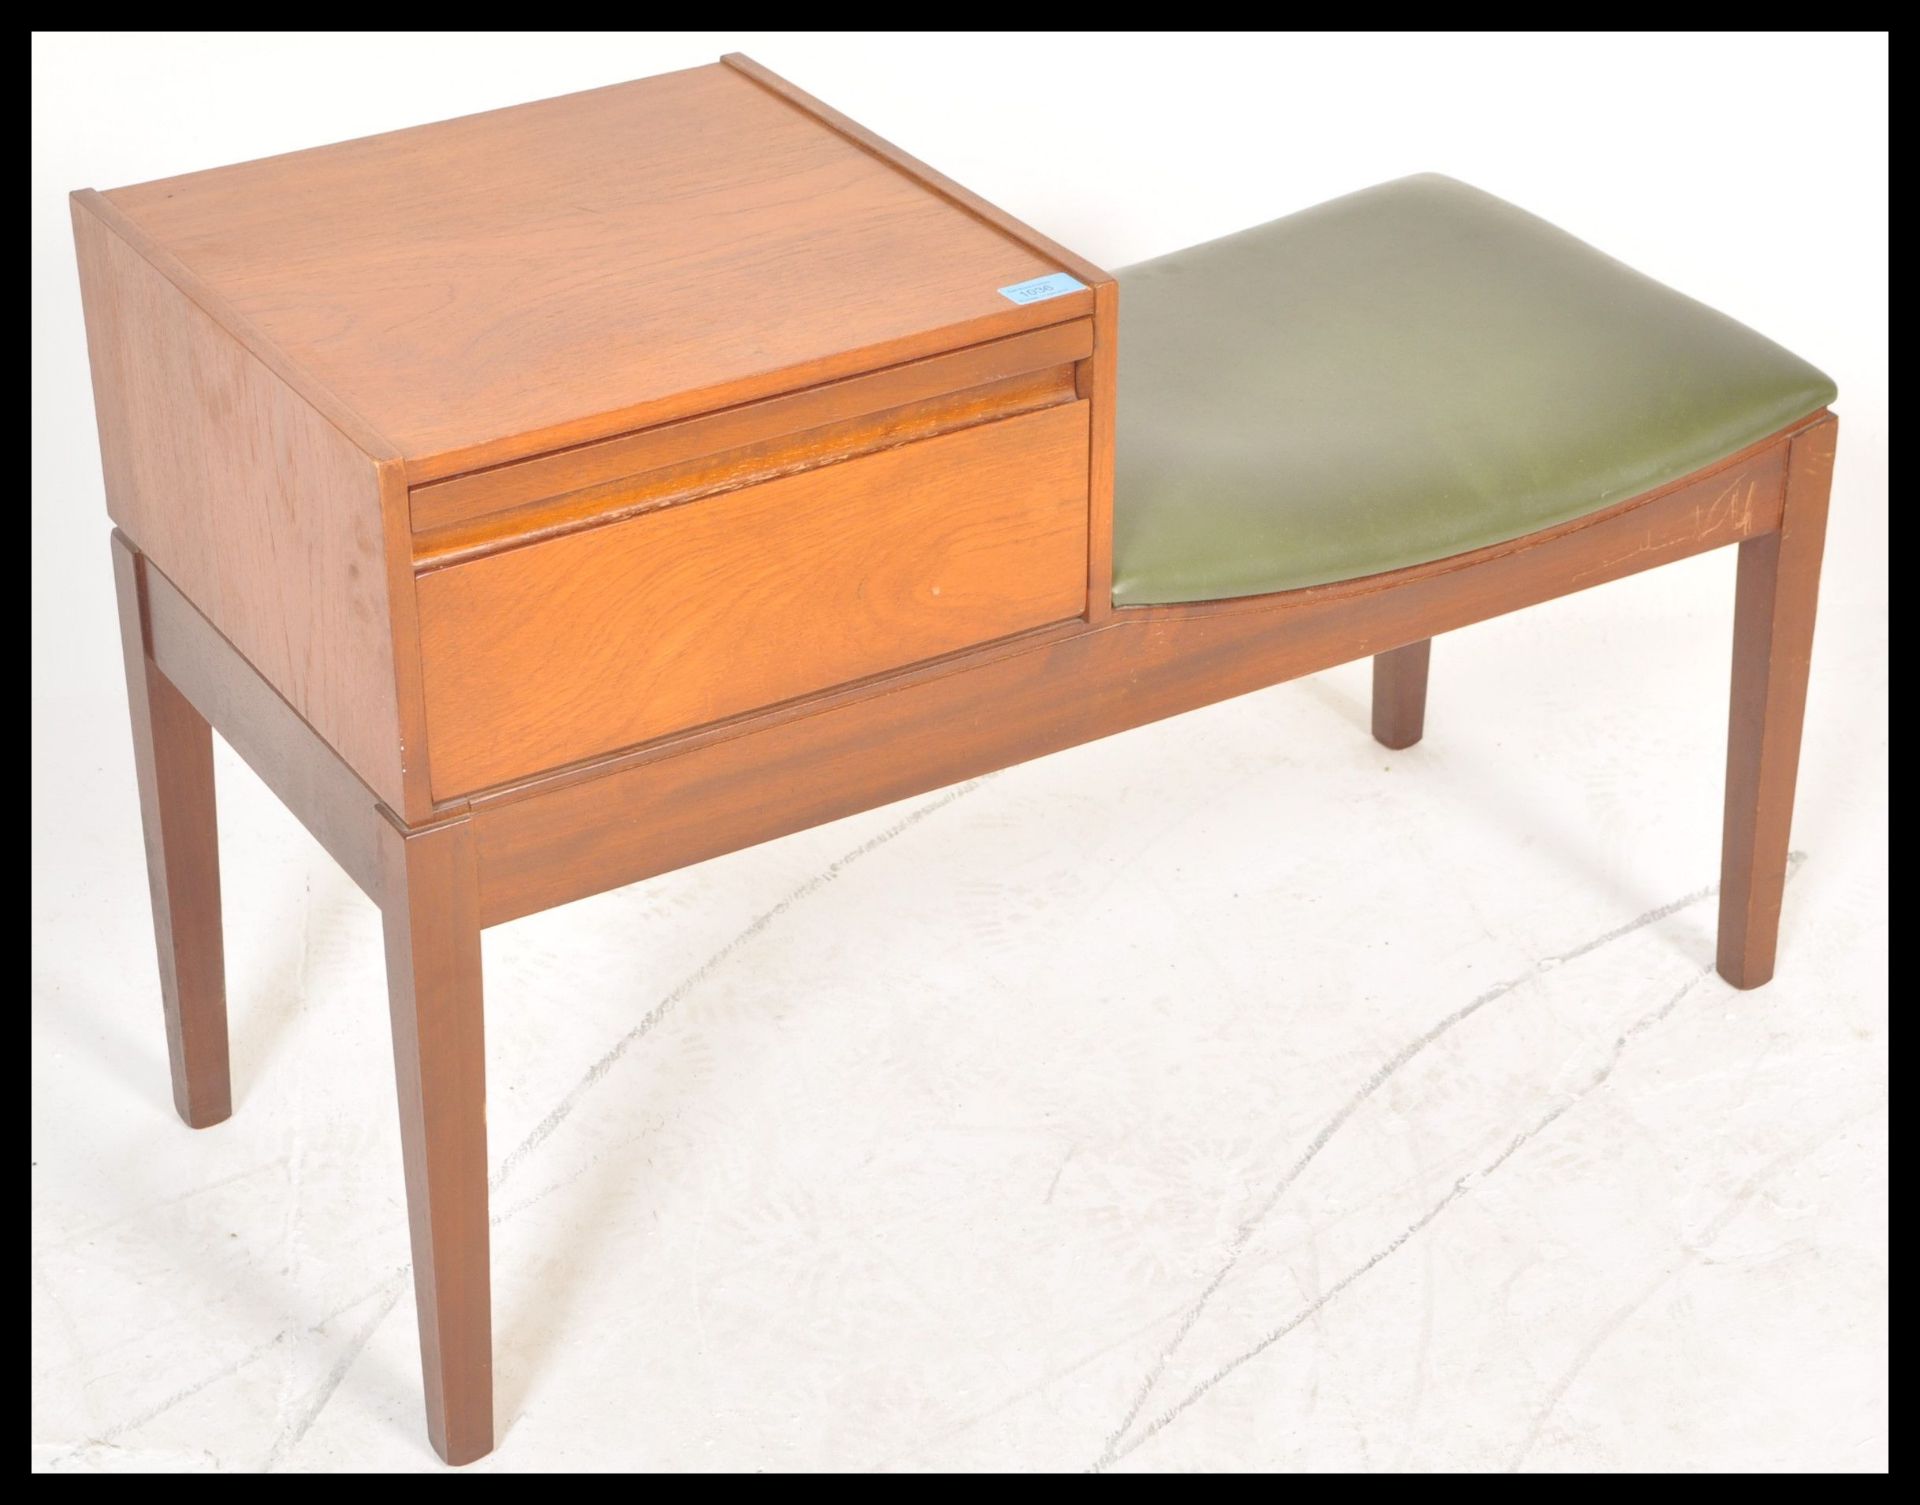 A retro 1970's teak wood telephone table / seat by Mr Chippy, button back seat pad with drawer above - Bild 2 aus 4